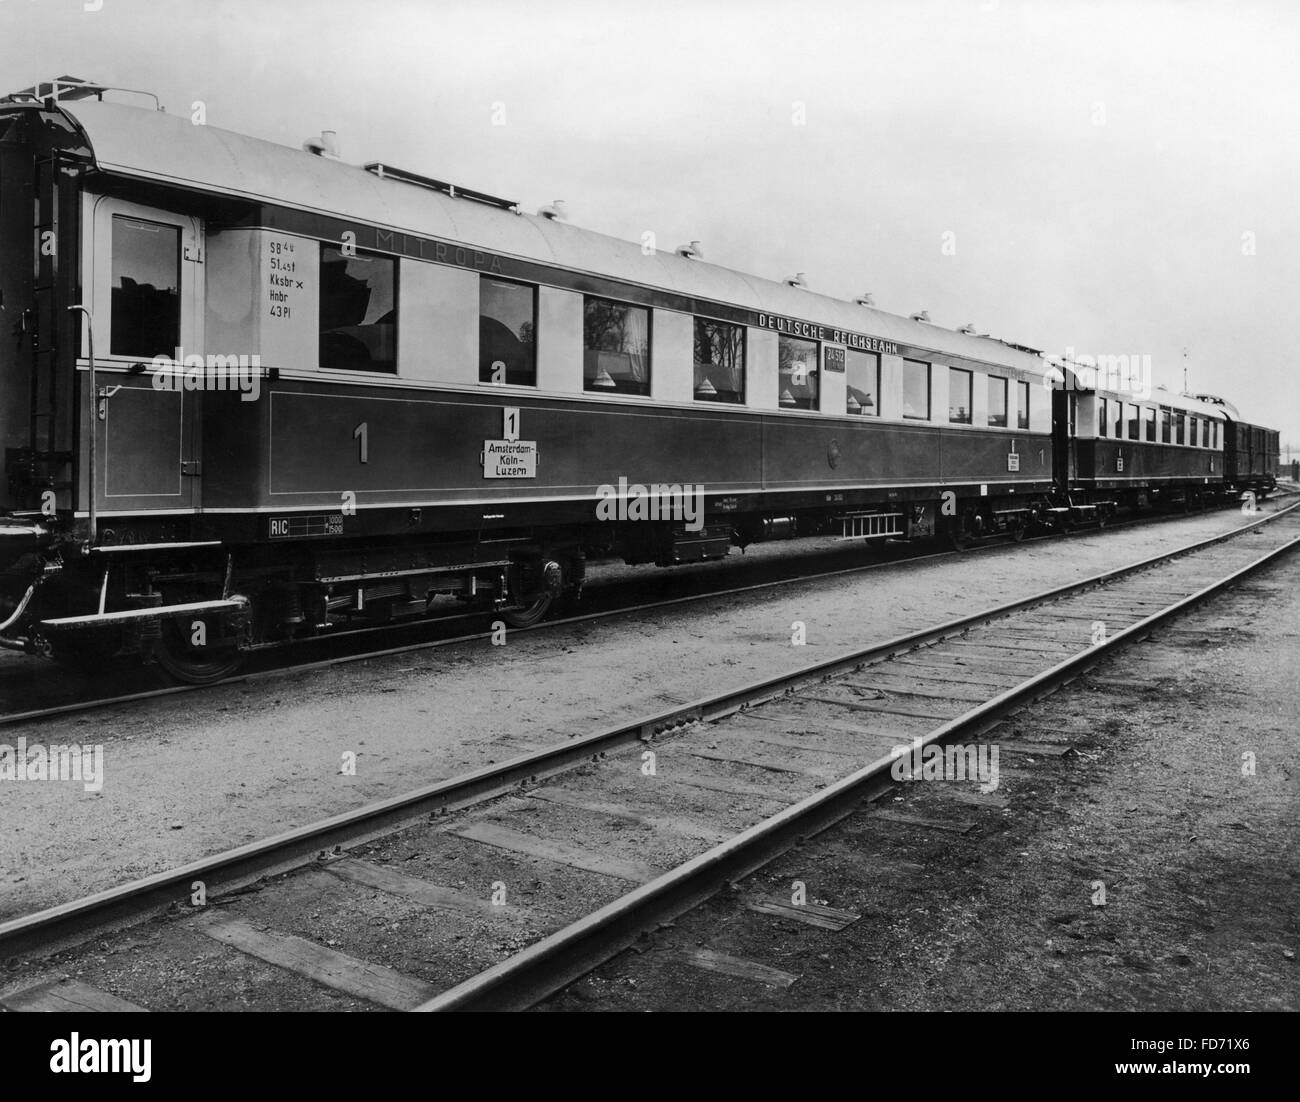 Long-distance express train, around the 1930s Stock Photo